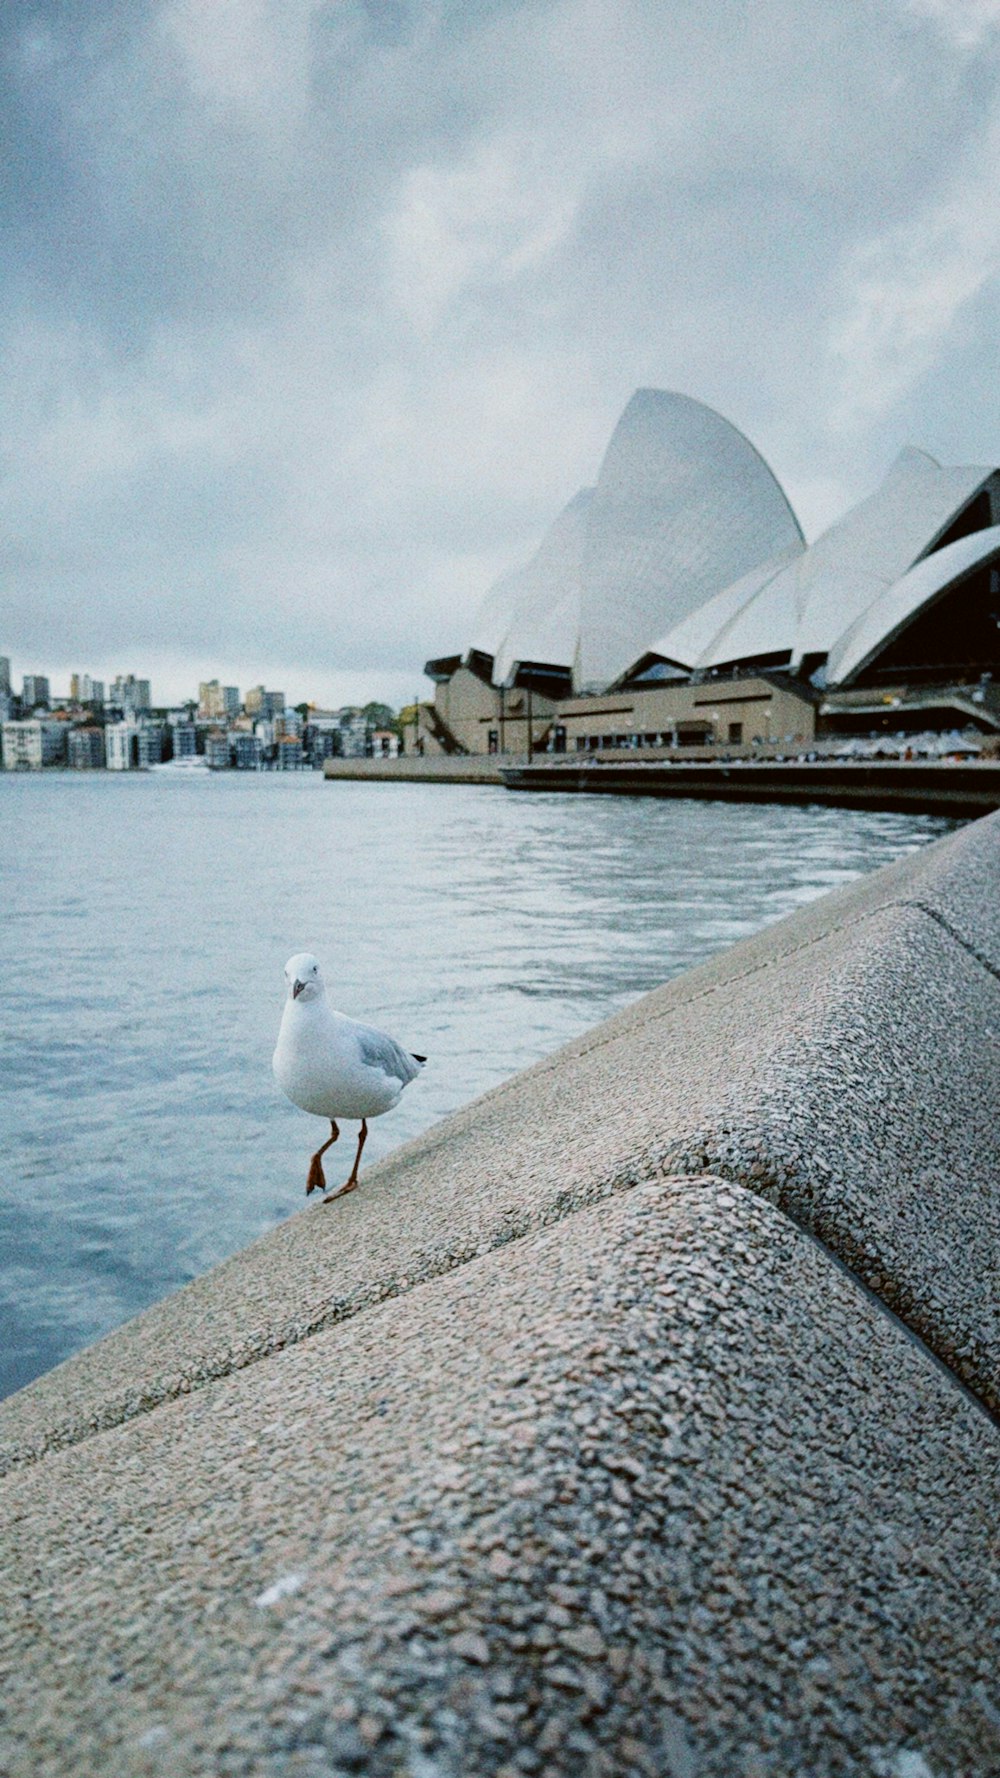 a seagull standing on the edge of a concrete wall near a body of